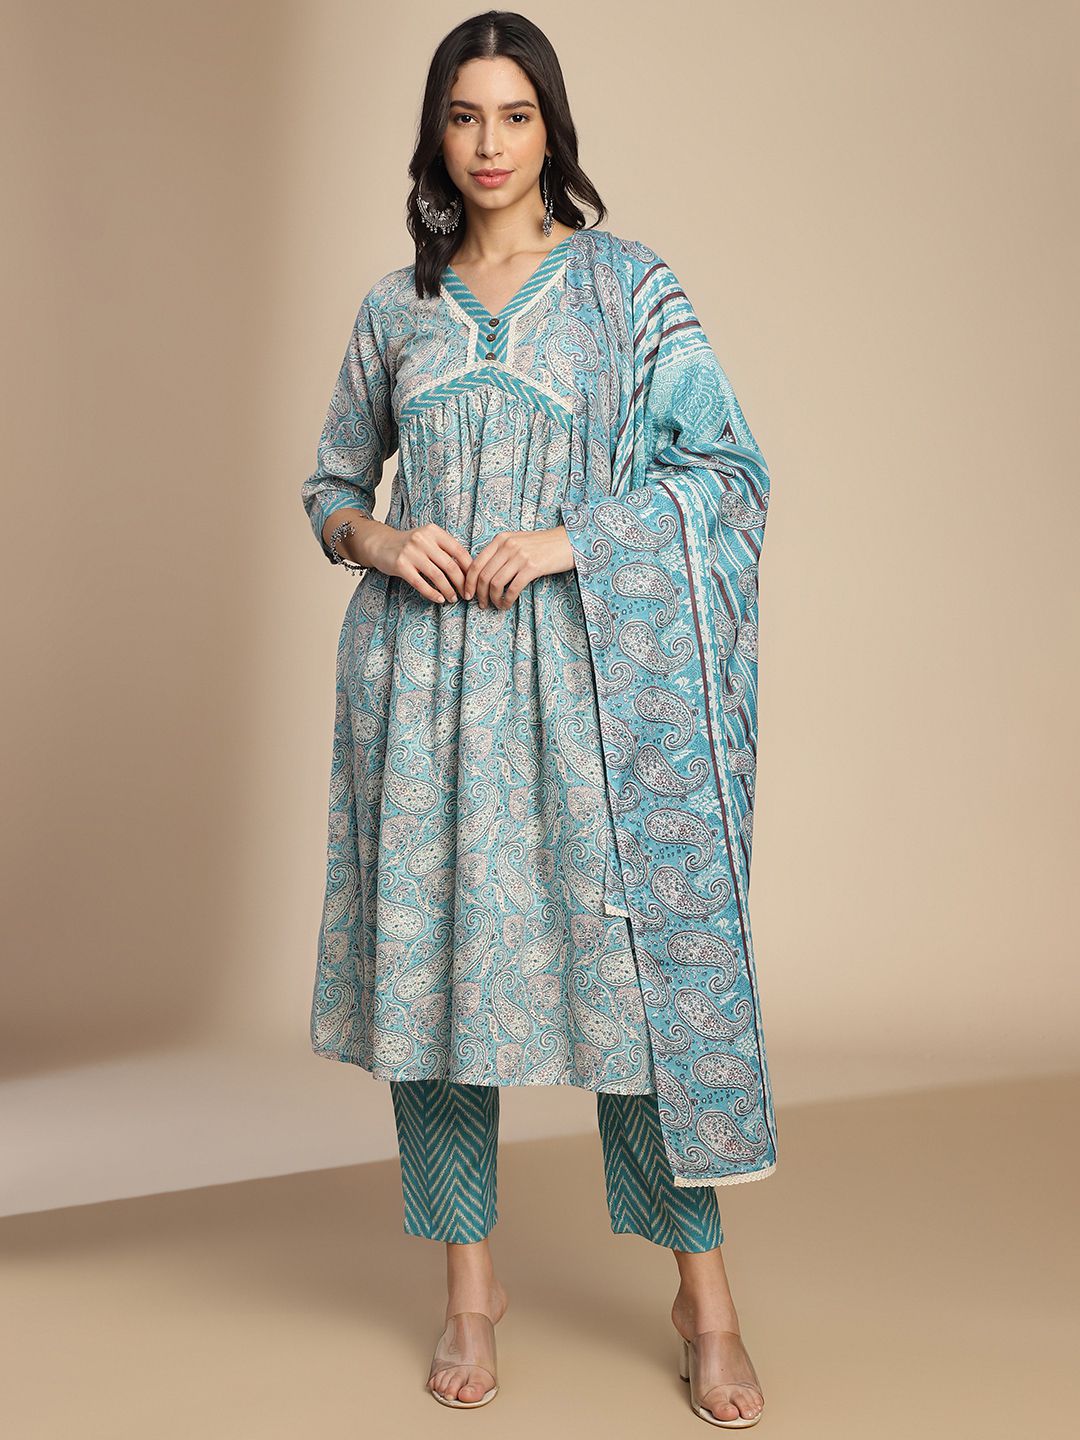     			Aarrah Cotton Blend Printed Ethnic Top With Salwar Women's Stitched Salwar Suit - Blue ( Pack of 1 )